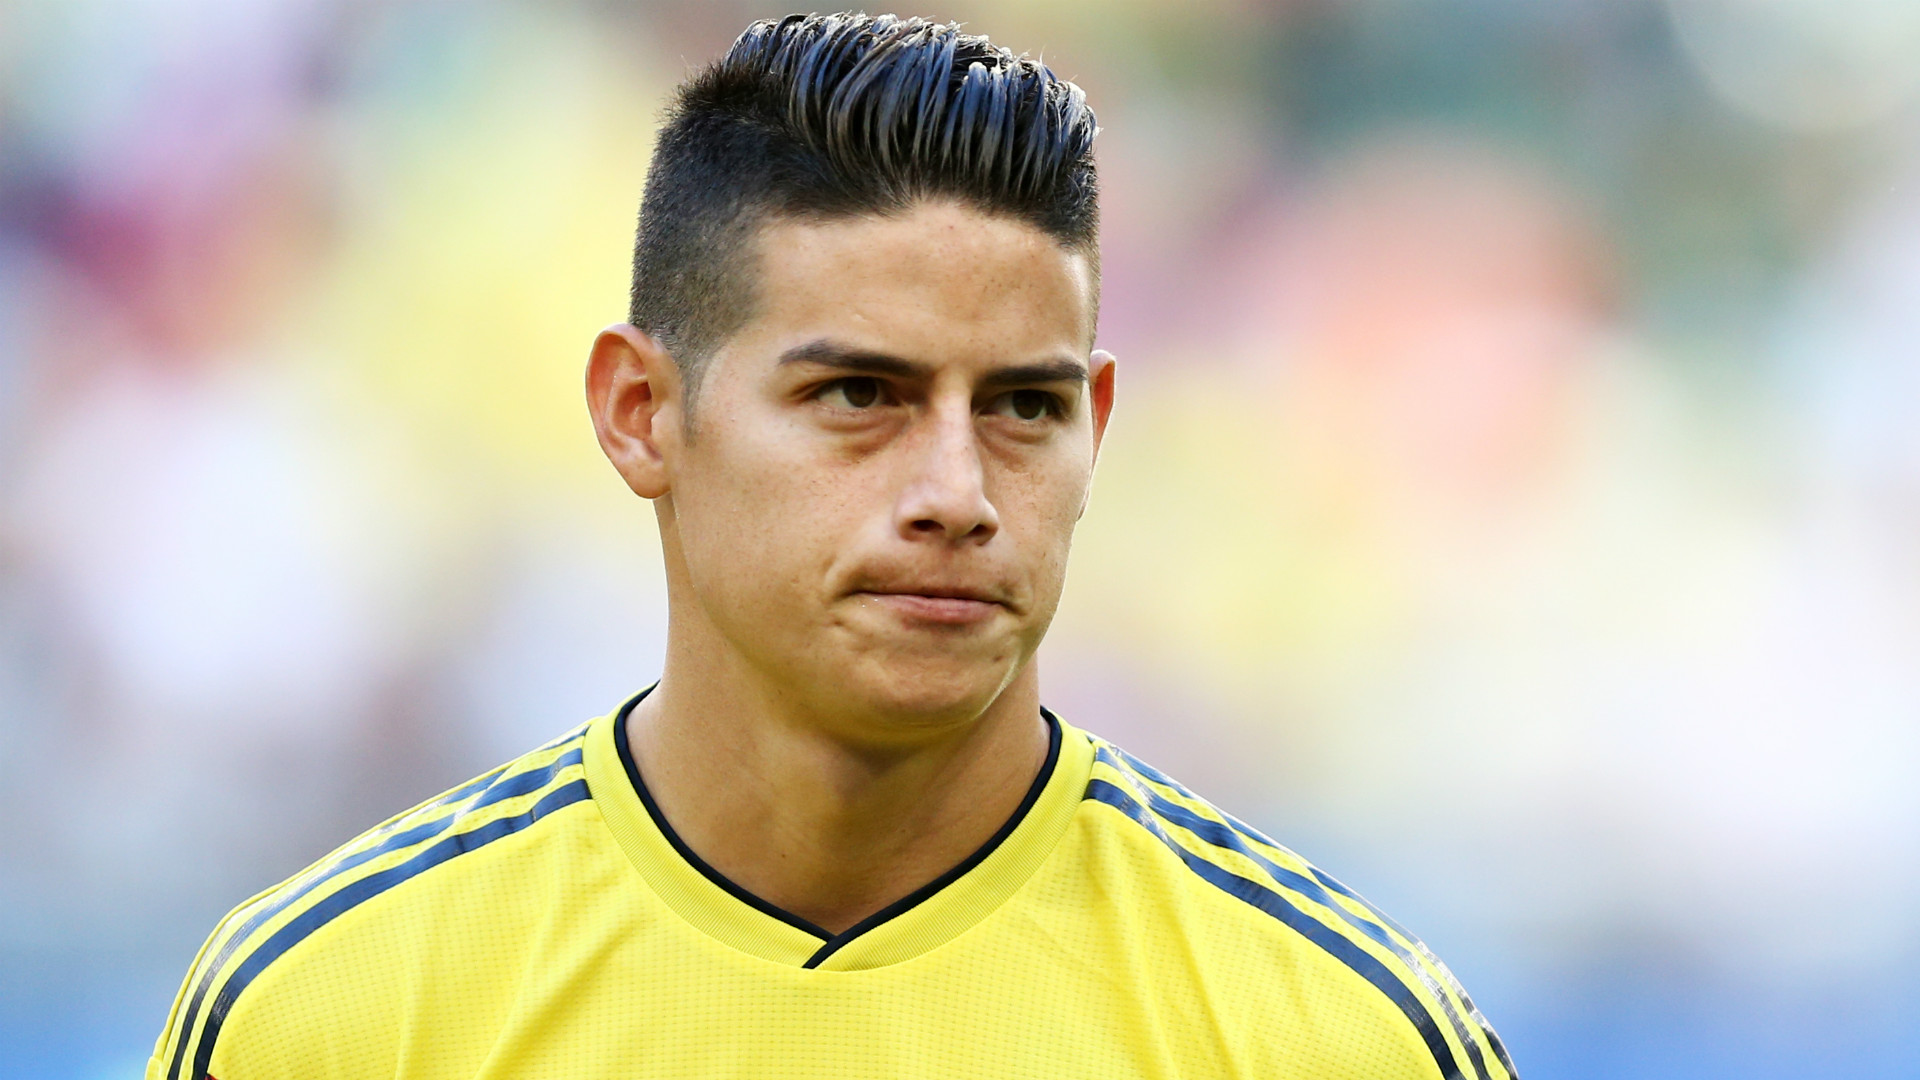 james rodriguez - cropped (Getty Images)